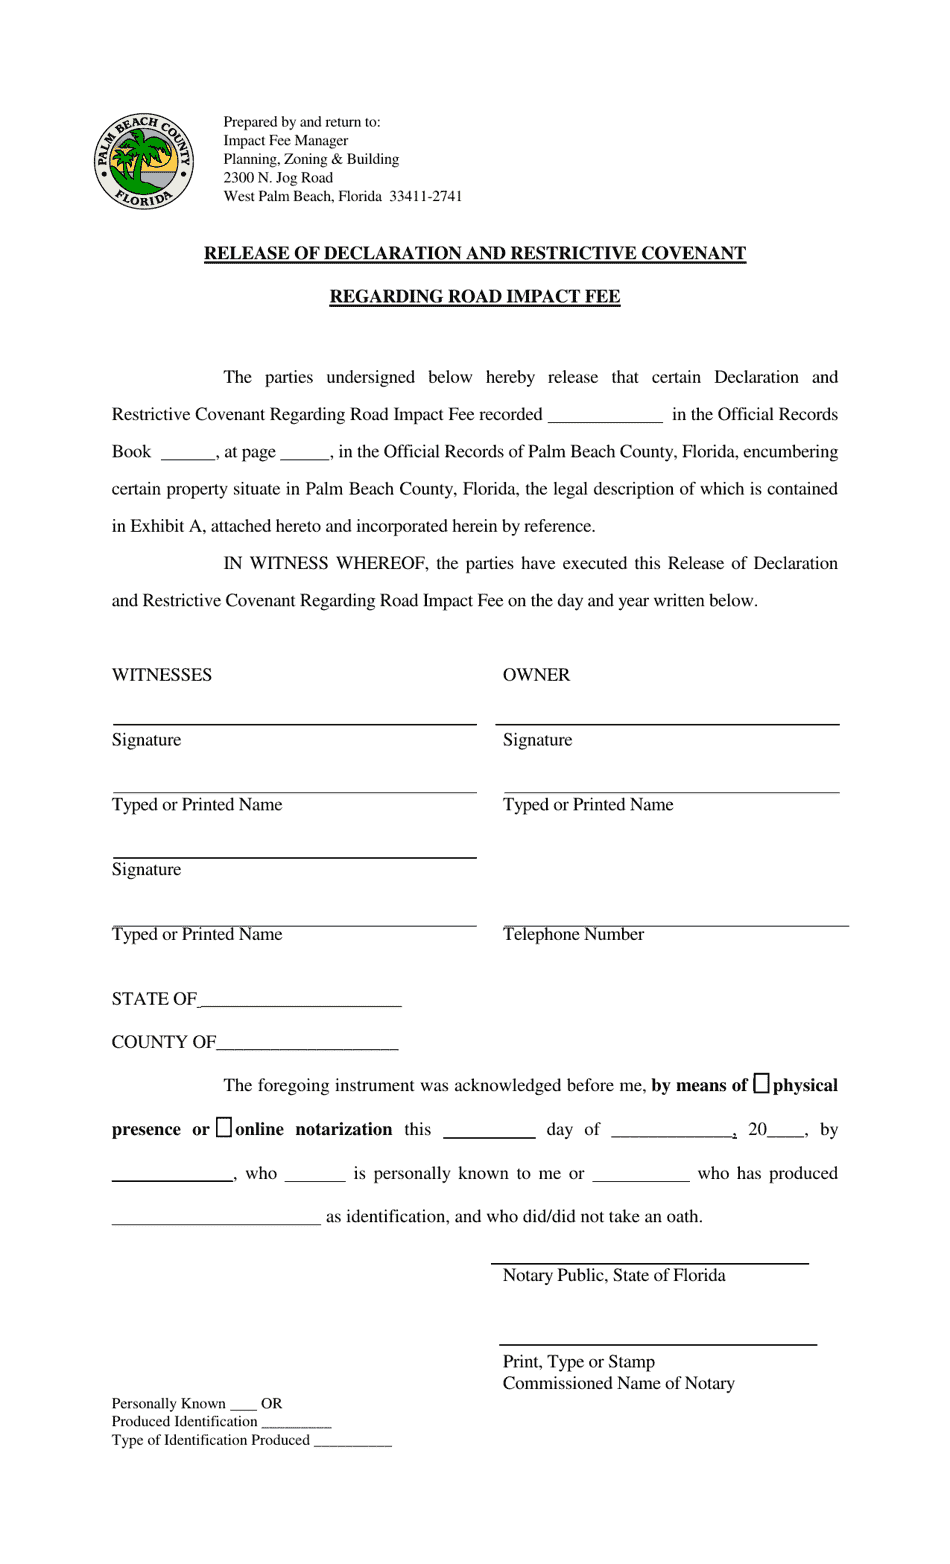 Release of Declaration and Restrictive Covenant Regarding Road Impact Fee - Palm Beach County, Florida, Page 1